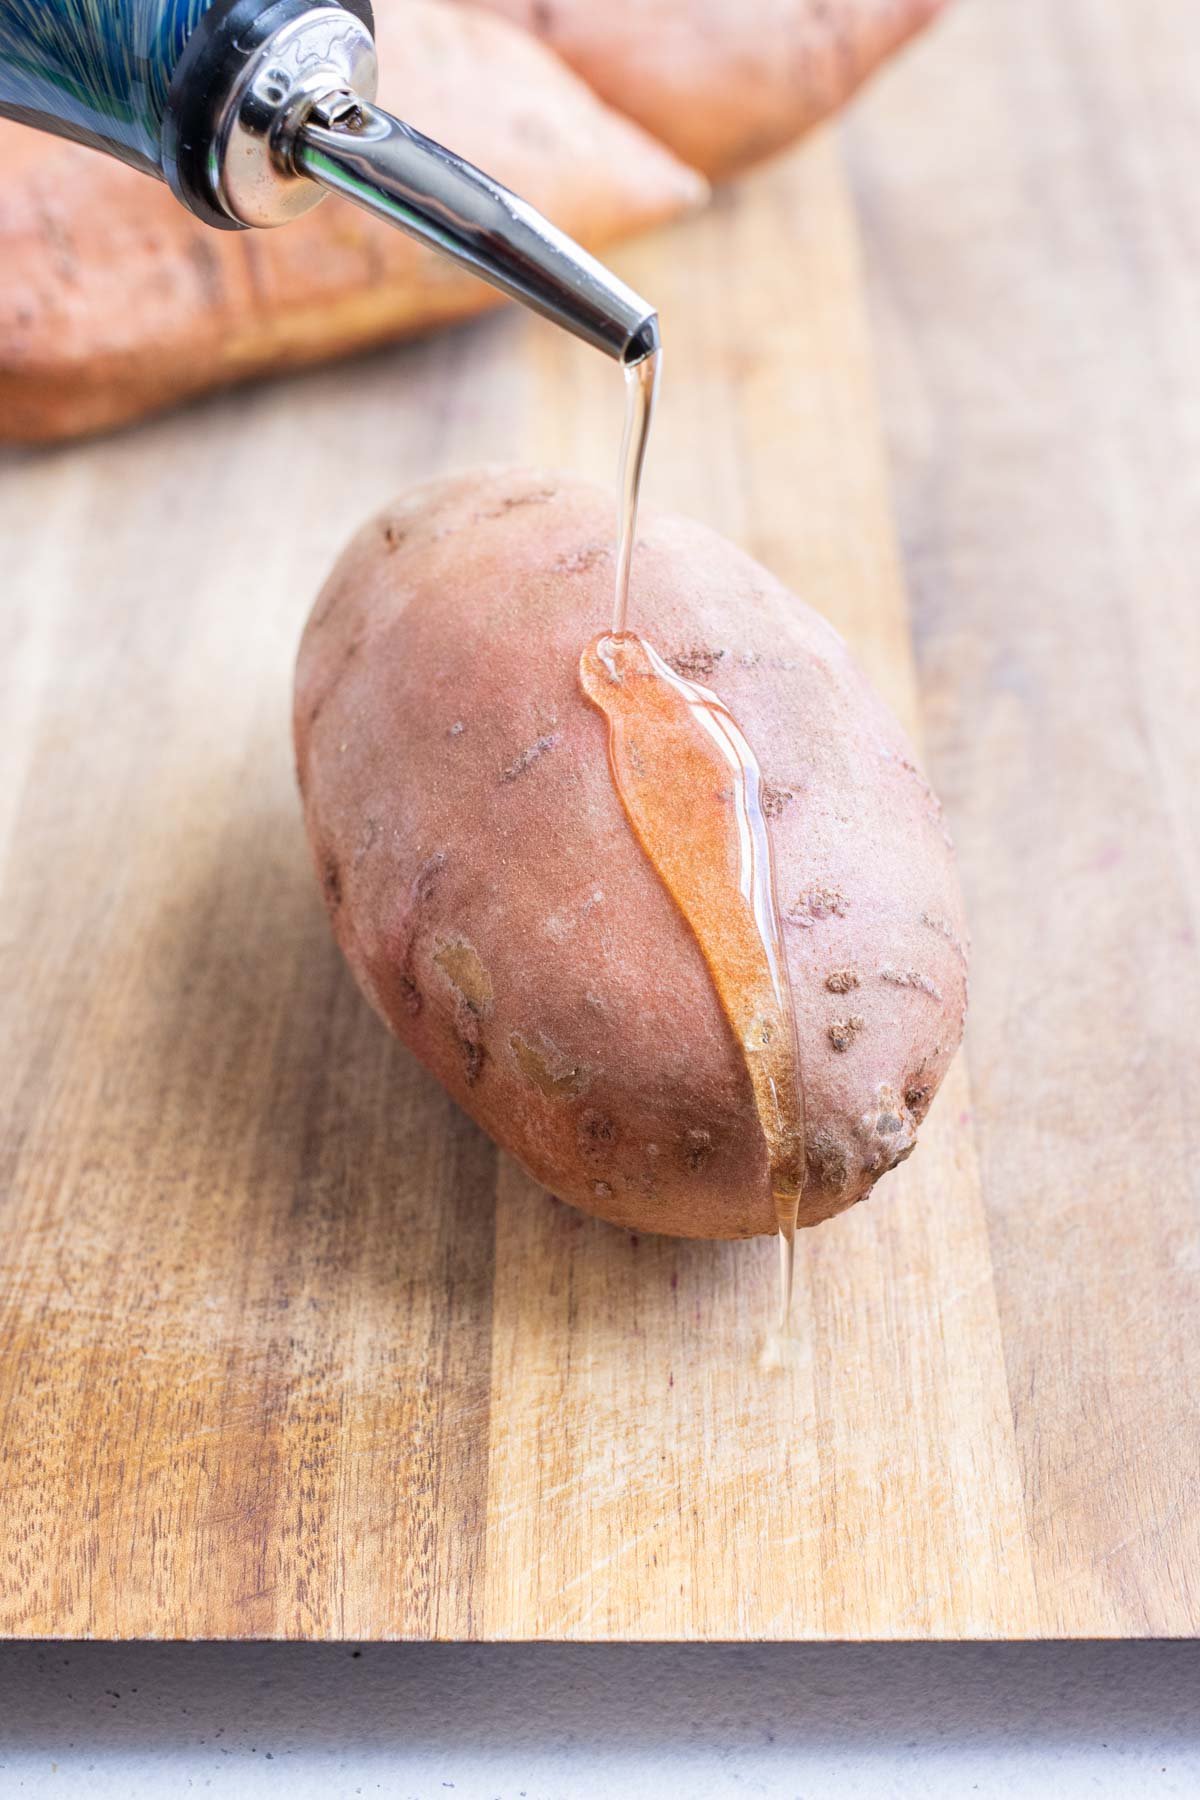 Oil is drizzled over a sweet potato.